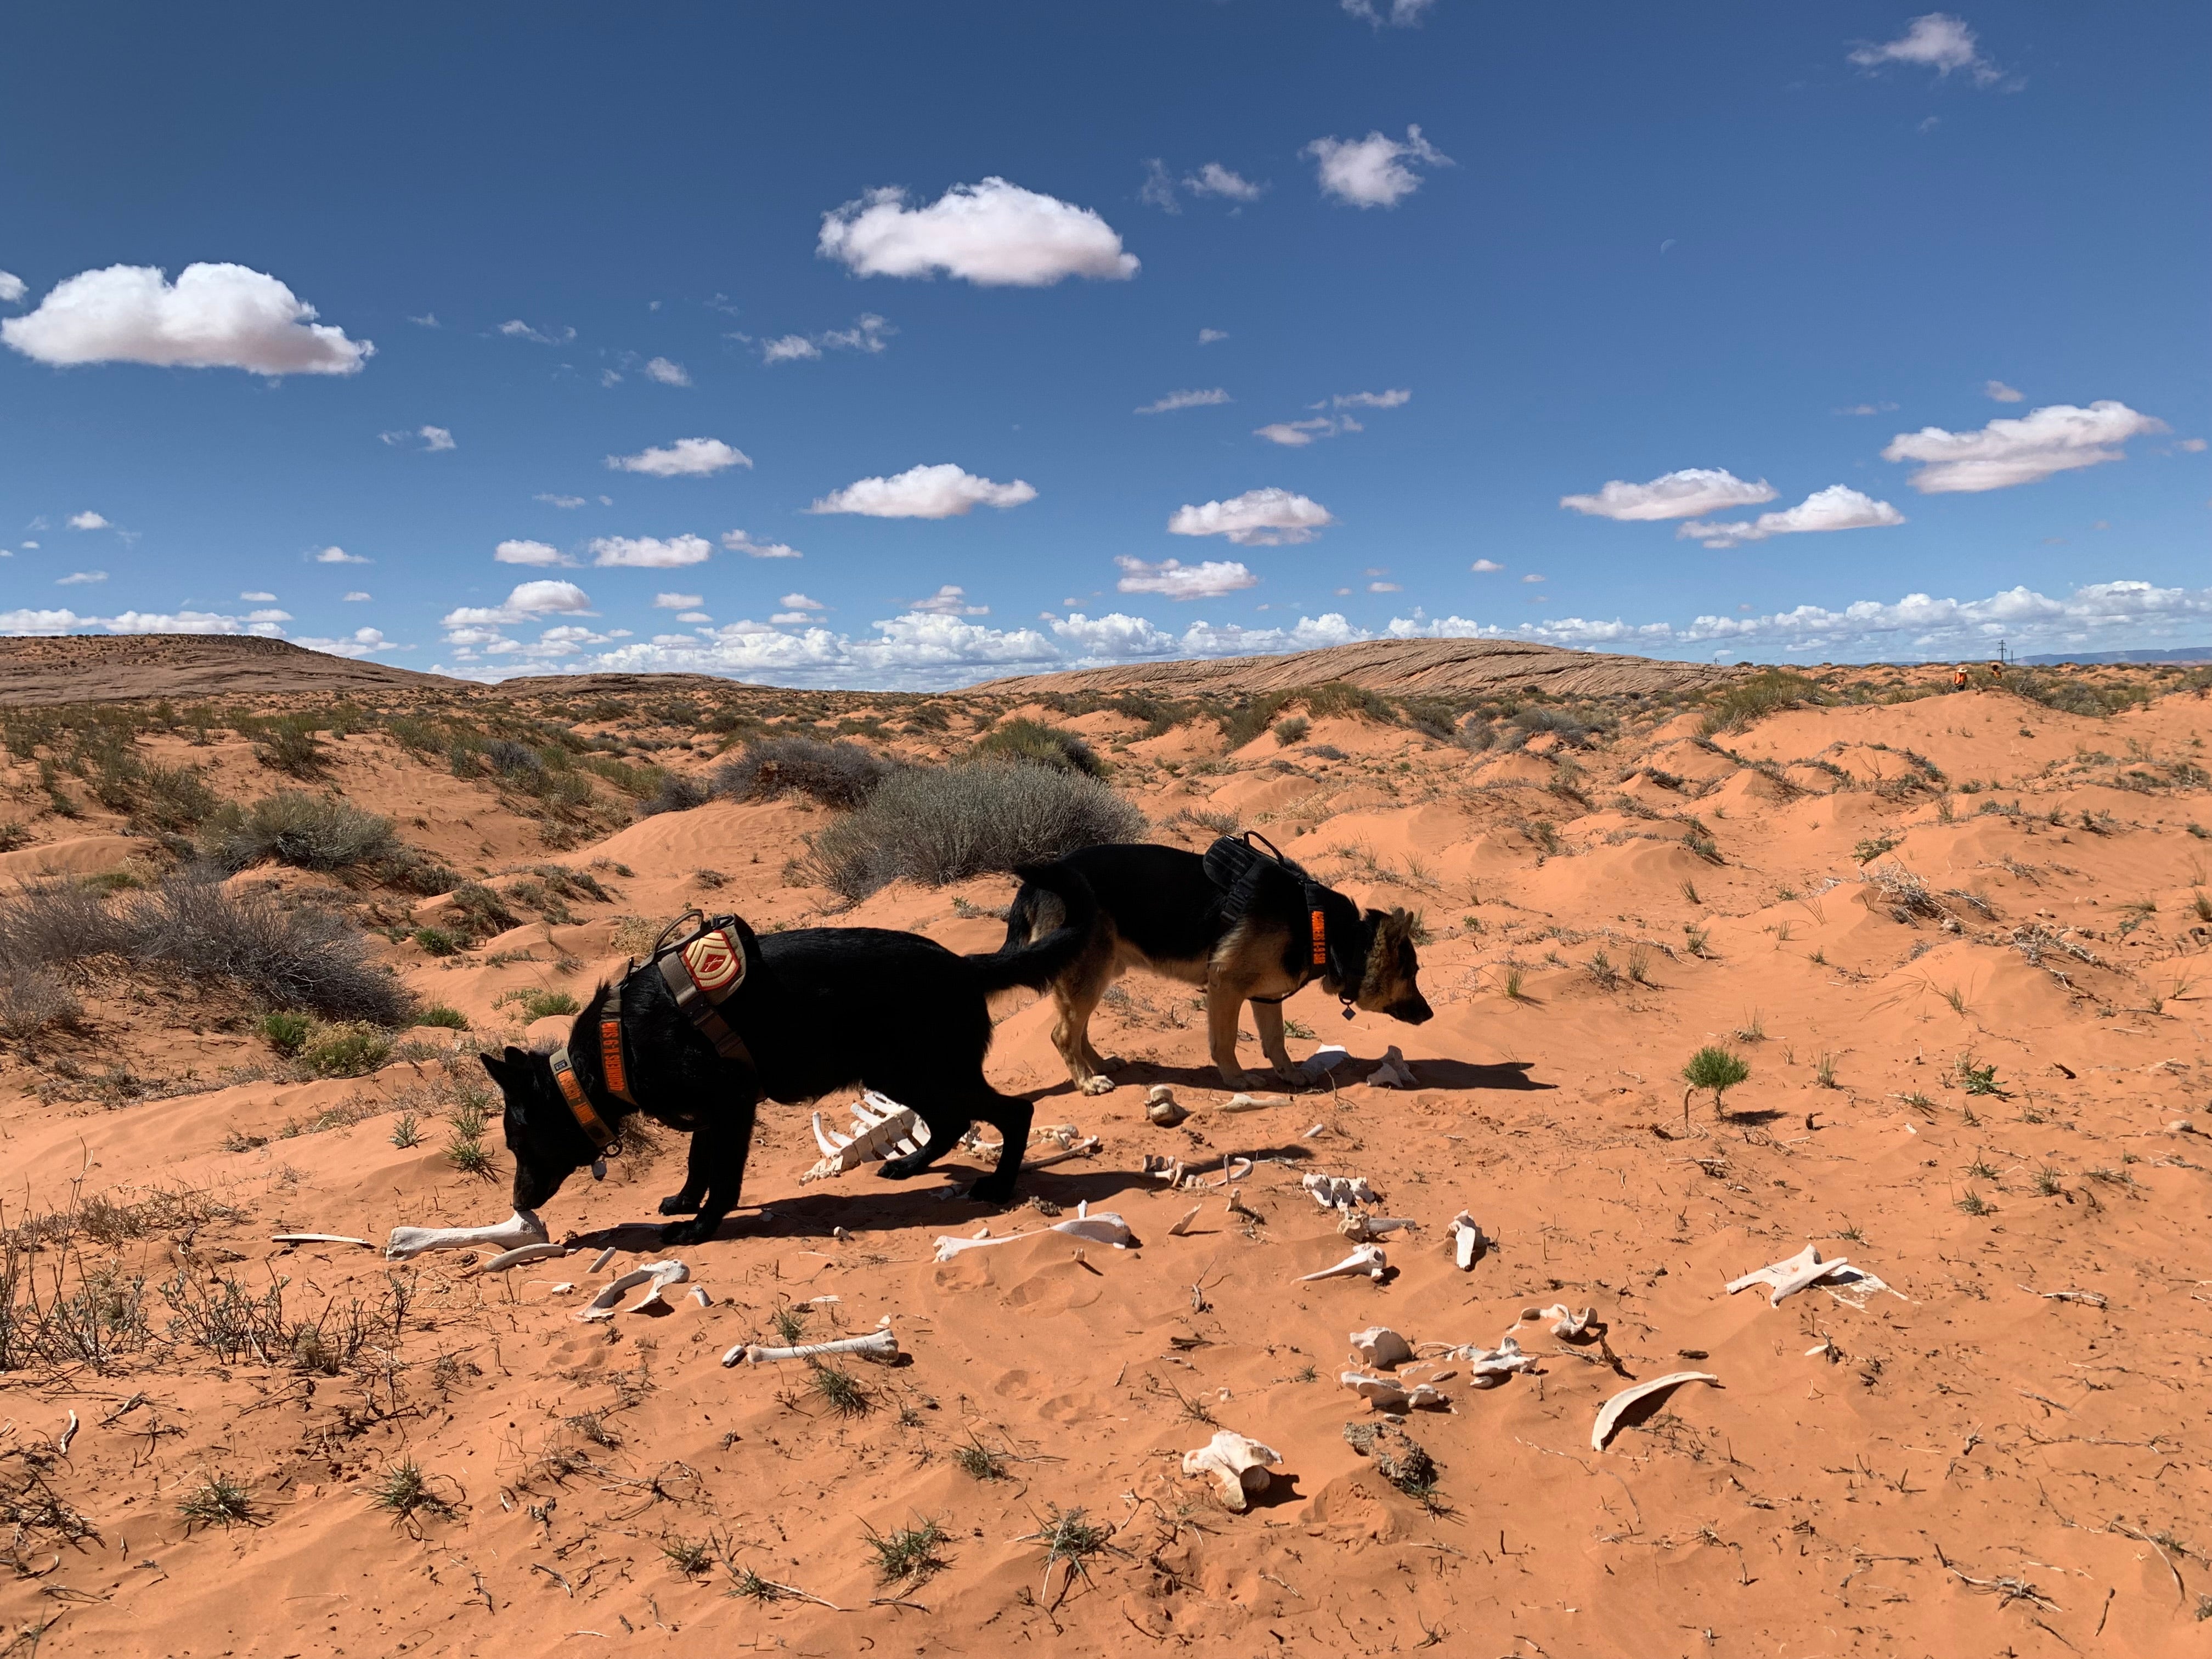 Trigger and Gunny of the Four Corners K9 Search and Rescue investigate cattle bones during a search for a missing person on the Navajo Nation on April 23rd, 2022.